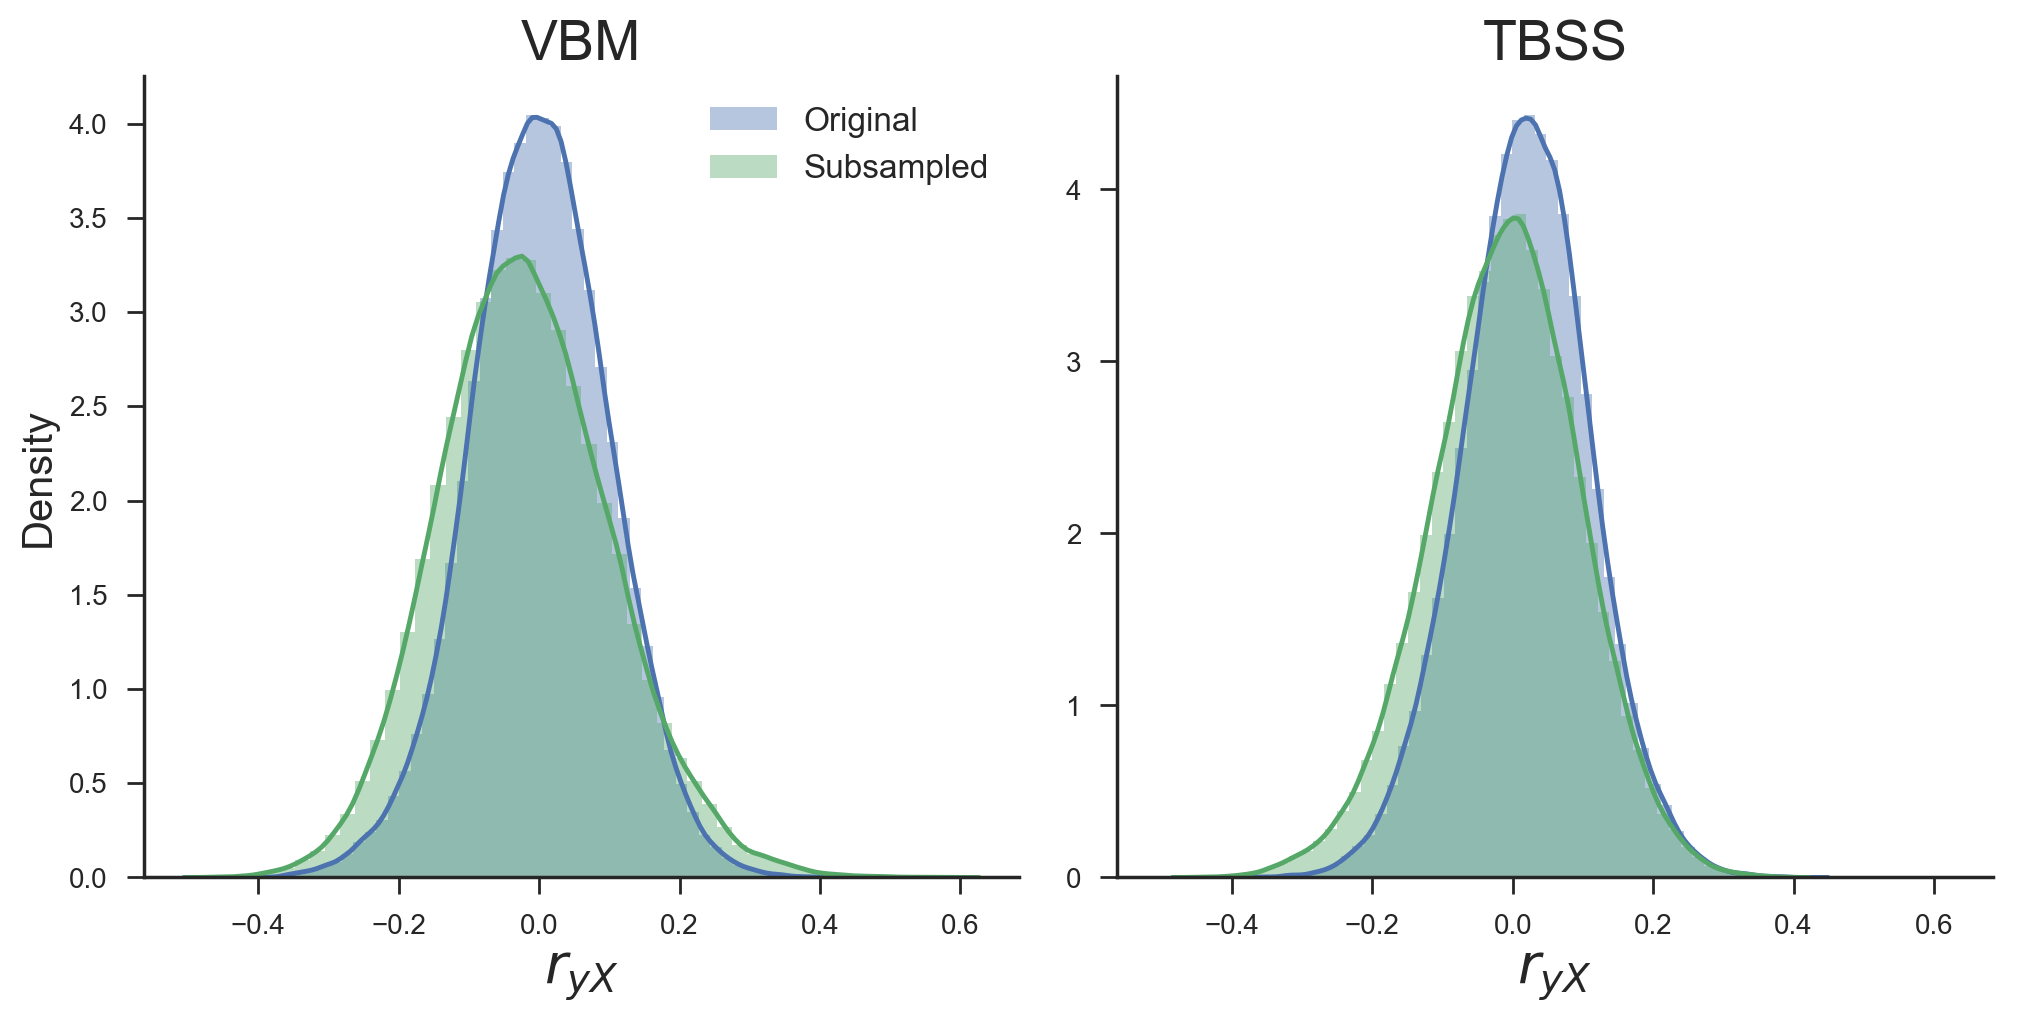 Density plots of the correlations between the target and voxels across all voxels before (blue) and after (green) subsampling for both the VBM and TBSS data. Density estimates are obtained by kernel density estimation with a Gaussian kernel and Scott’s rule (Scott, 1979) for bandwidth selection.